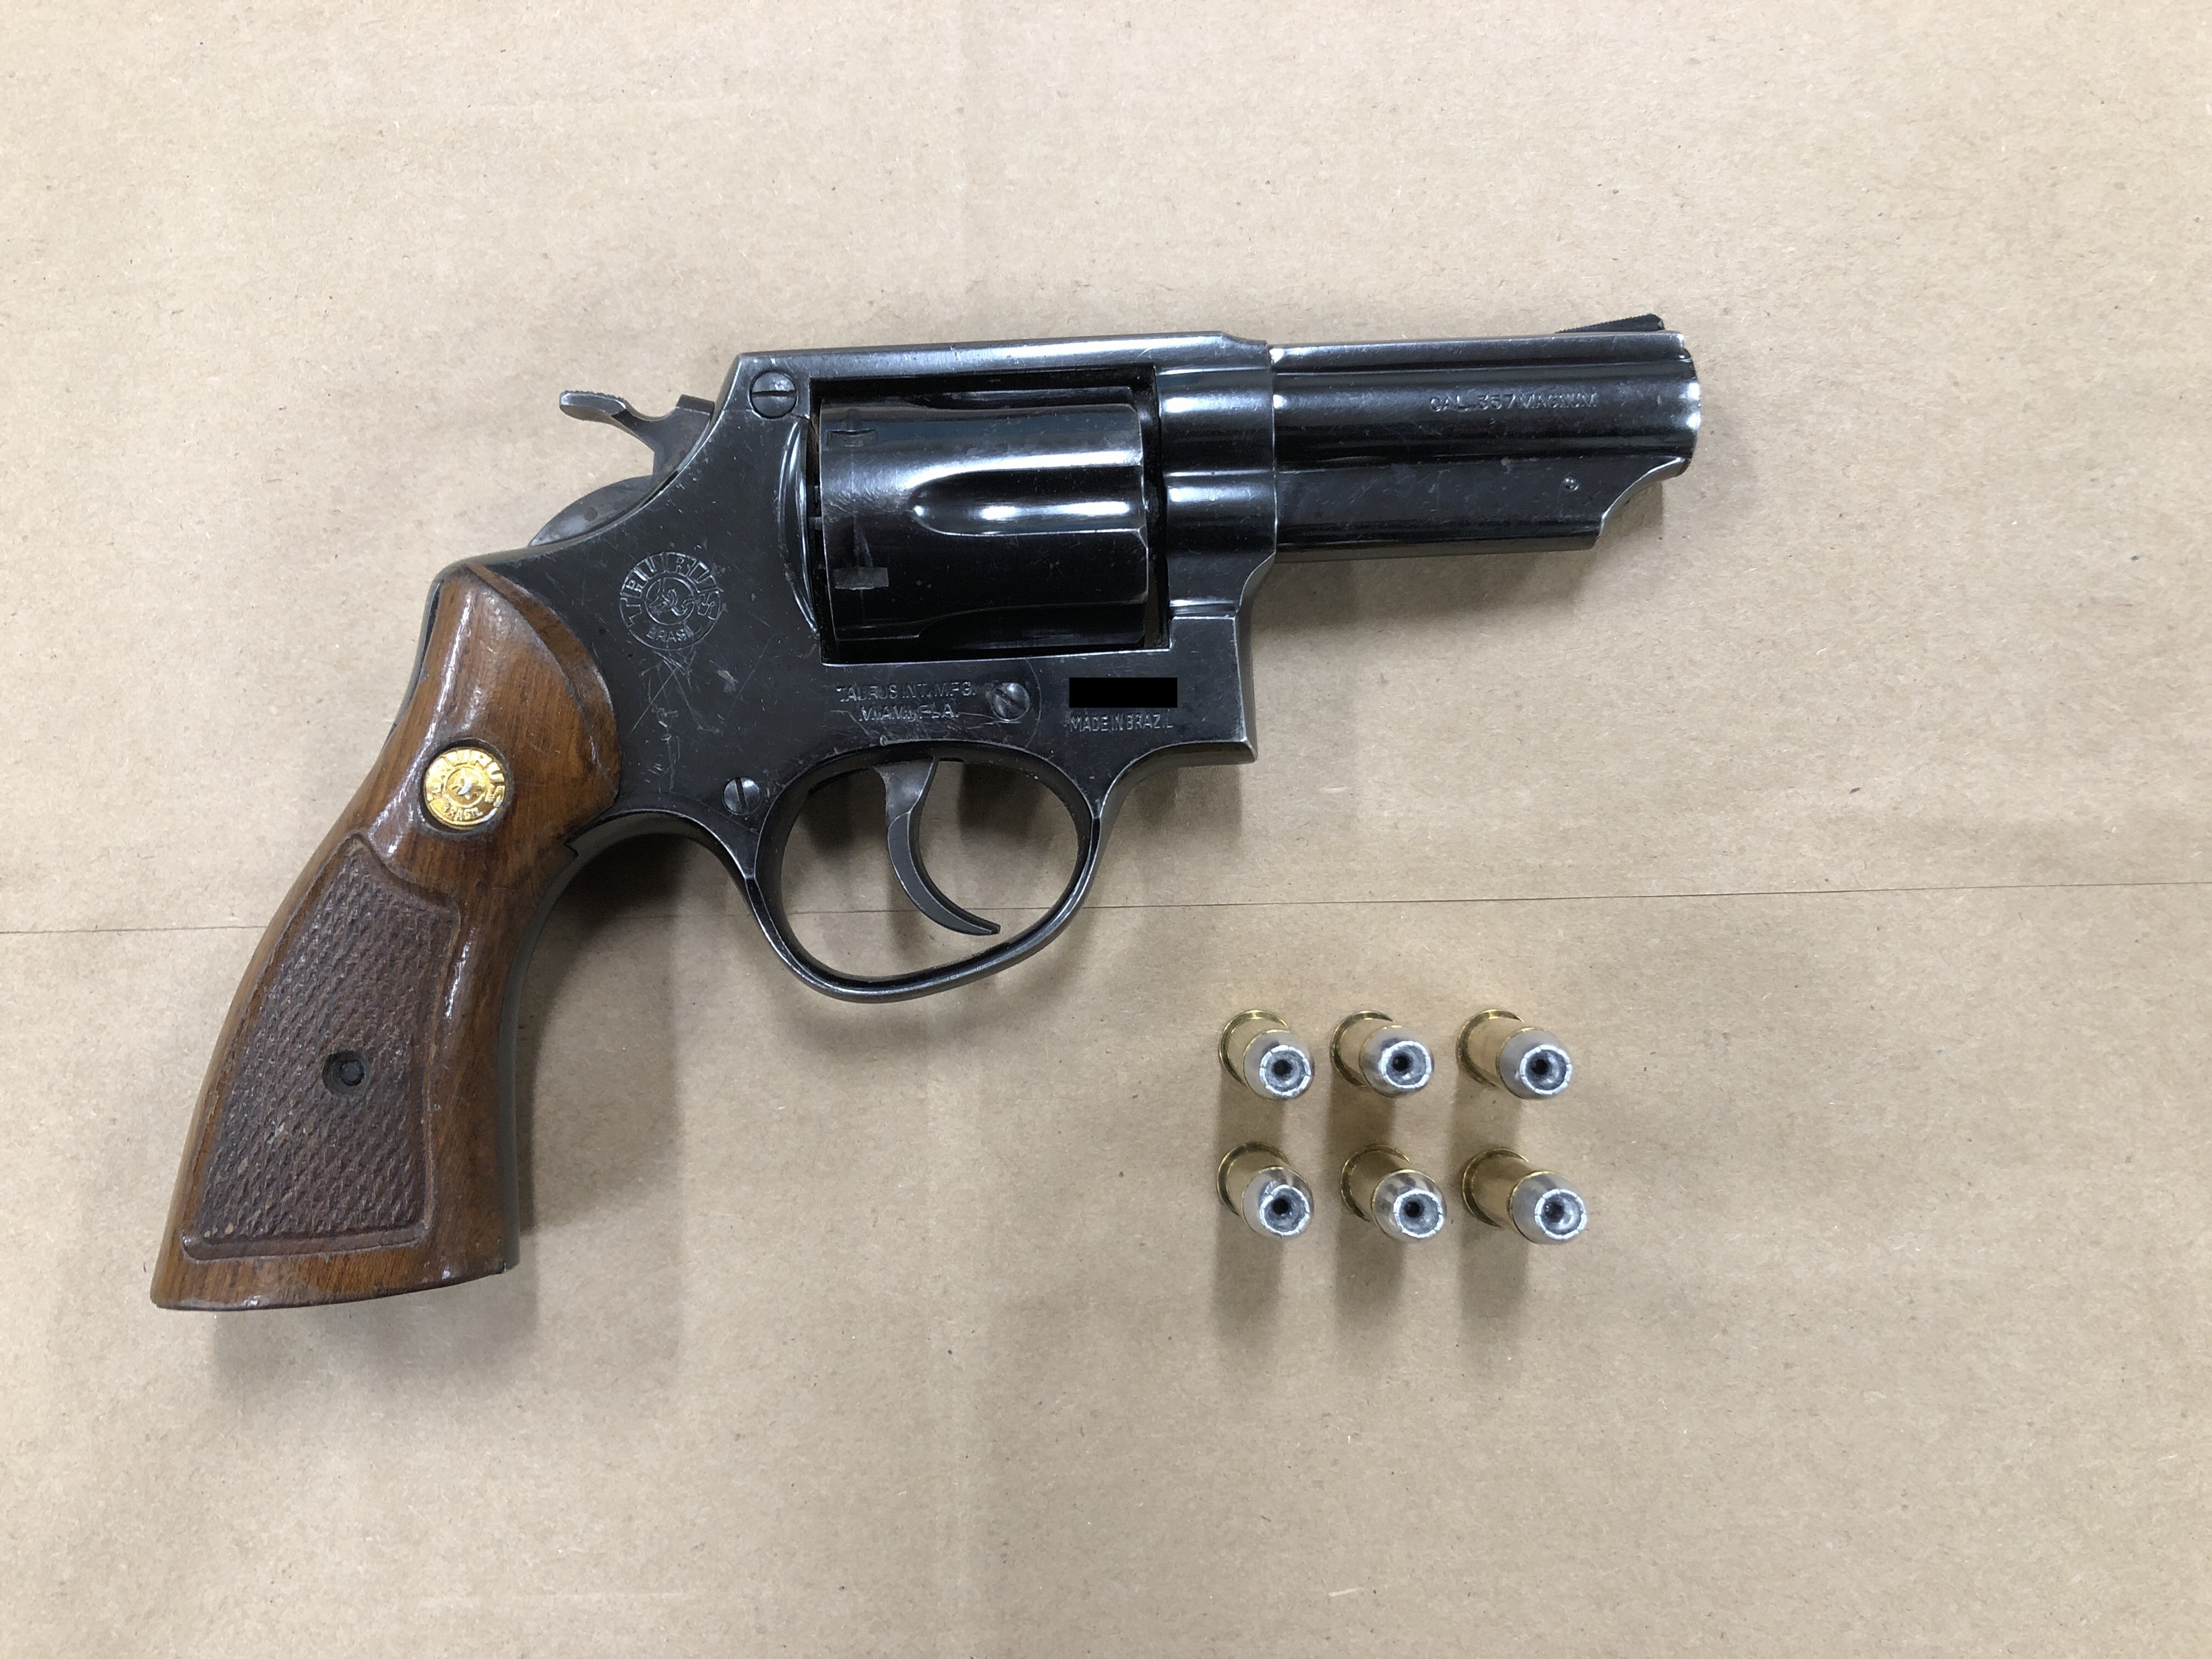 Loaded Handghun Found During Car Stop Case 20-46482